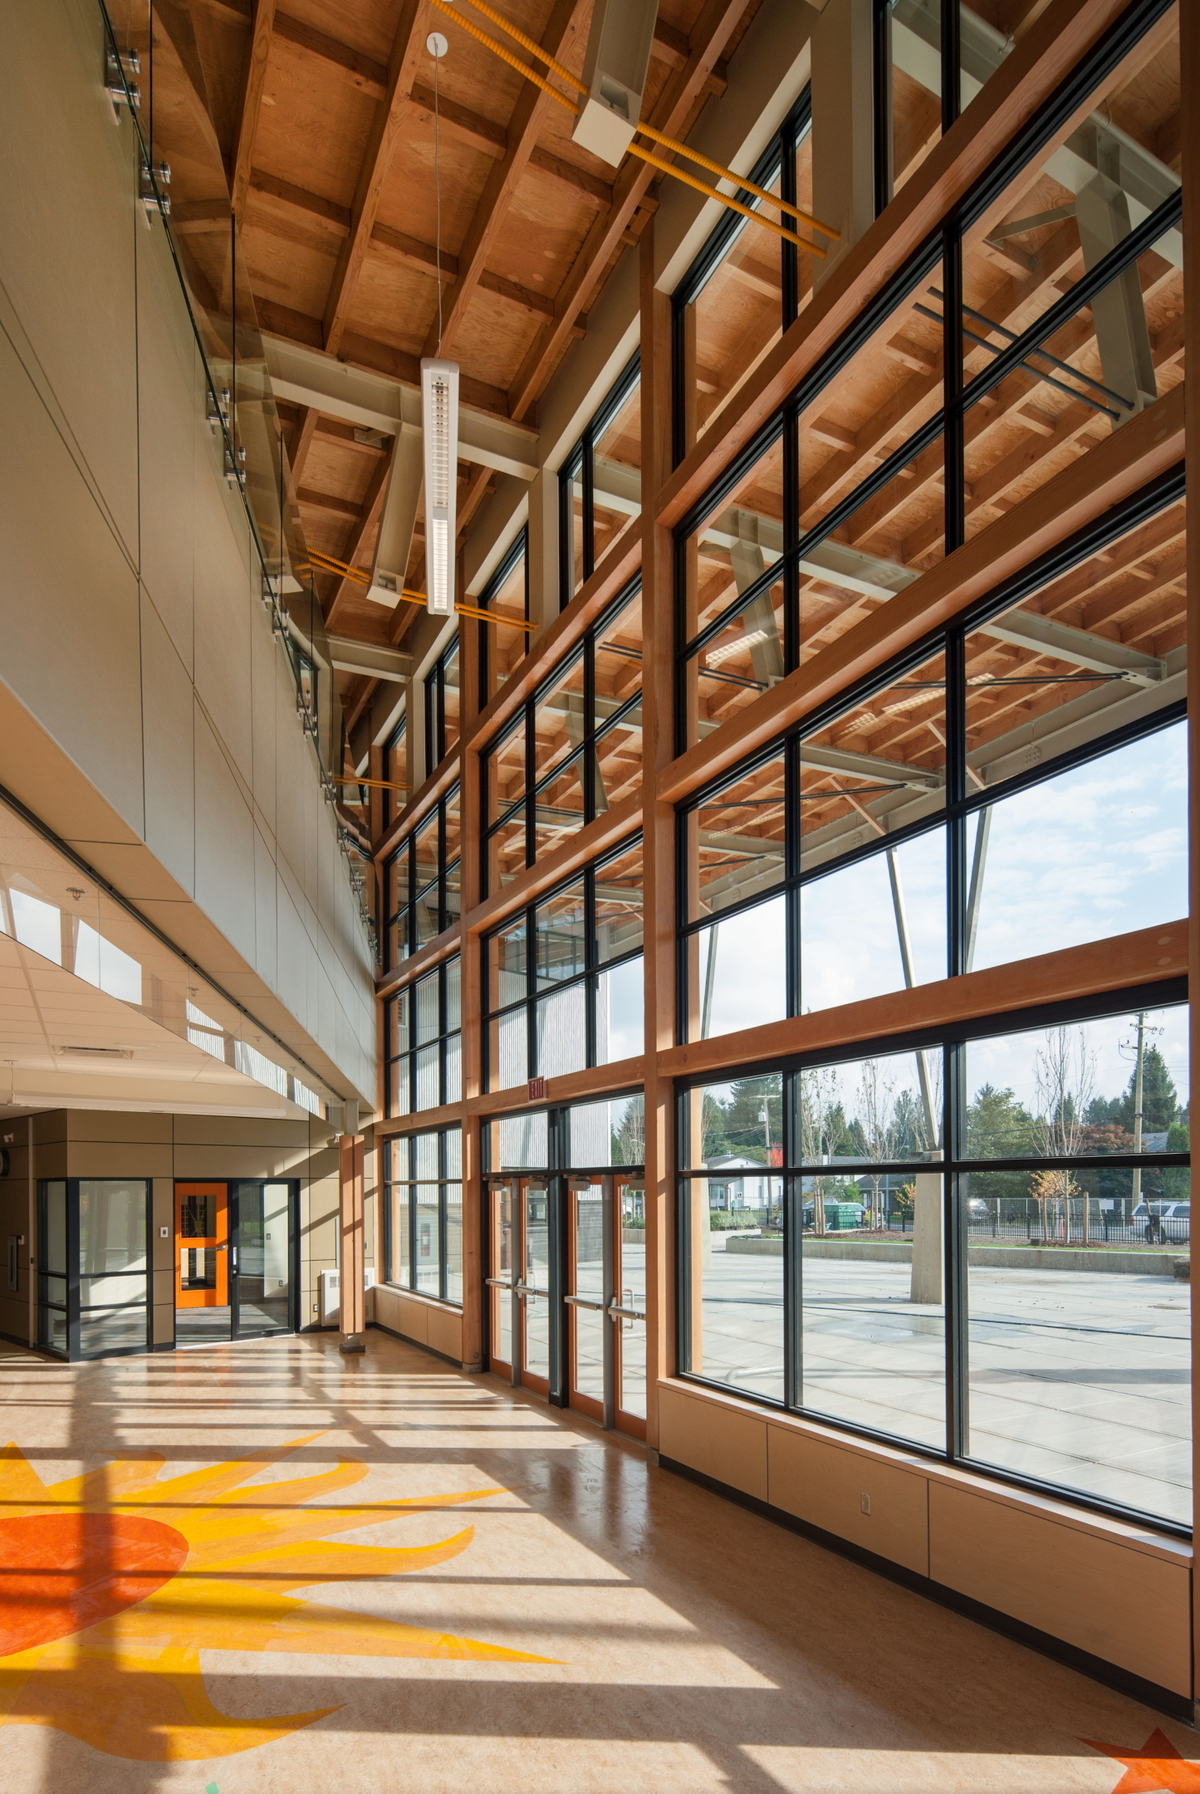 Interior daytime view of low rise hybrid James Park Elementary School main entrance, showing glass, steel, and exposed wood ceiling construction, which provides warmth and beauty to this state-of-the-art, LEED certified, energy-smart building